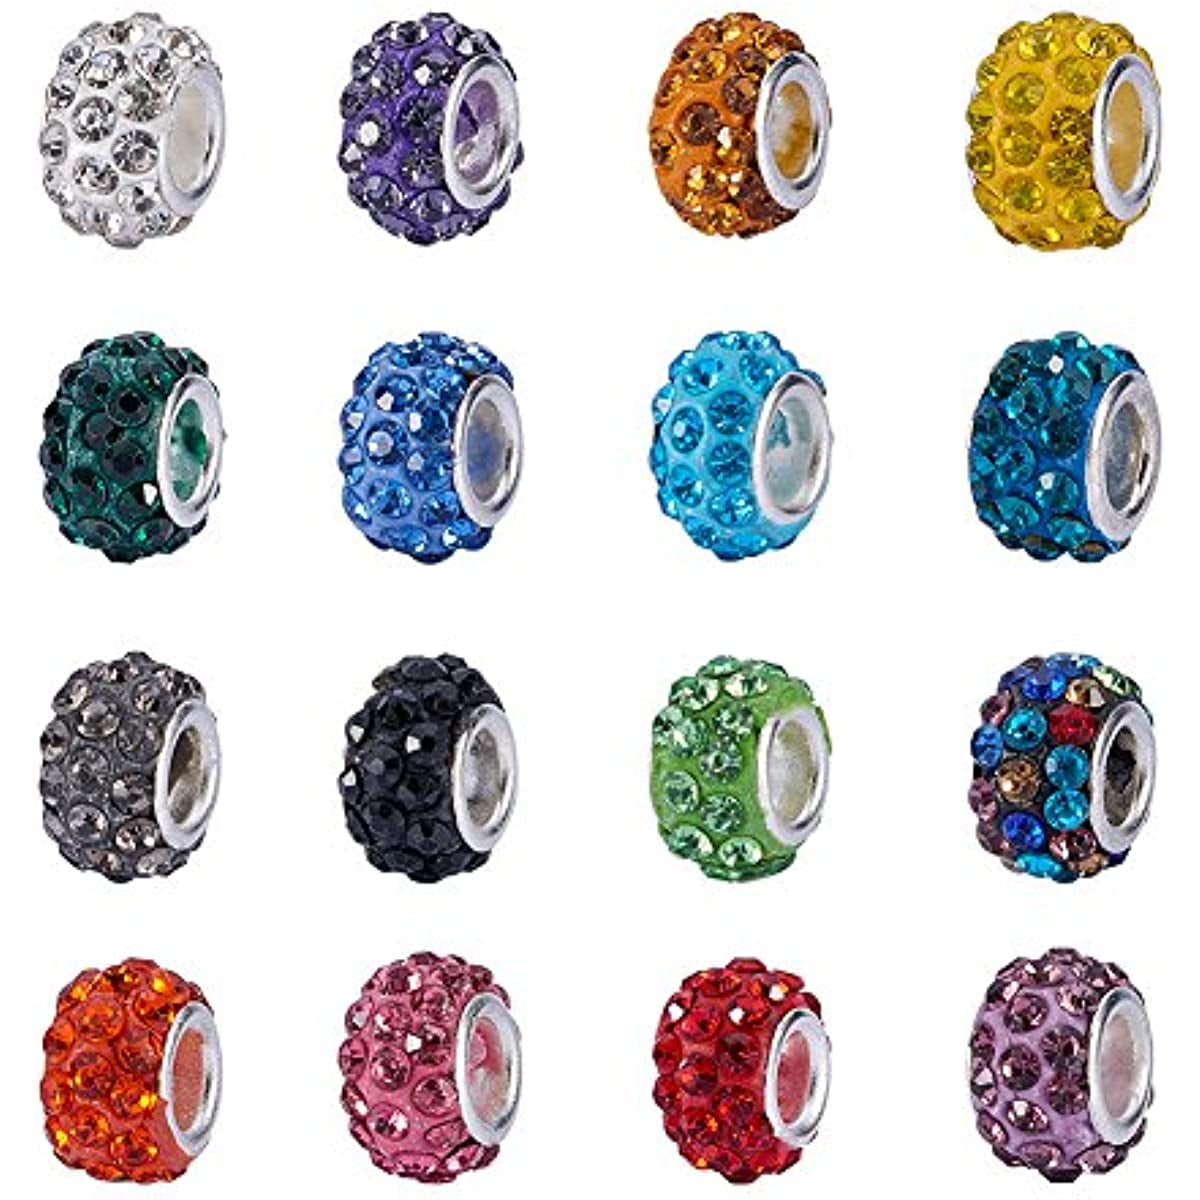 100 Pieces 14mm European Large Hole Spacer Beads Mix Color With Silver  Brass Cores Assortments Charm Lampwork Beads Supplies For Necklace  Bracelets Je